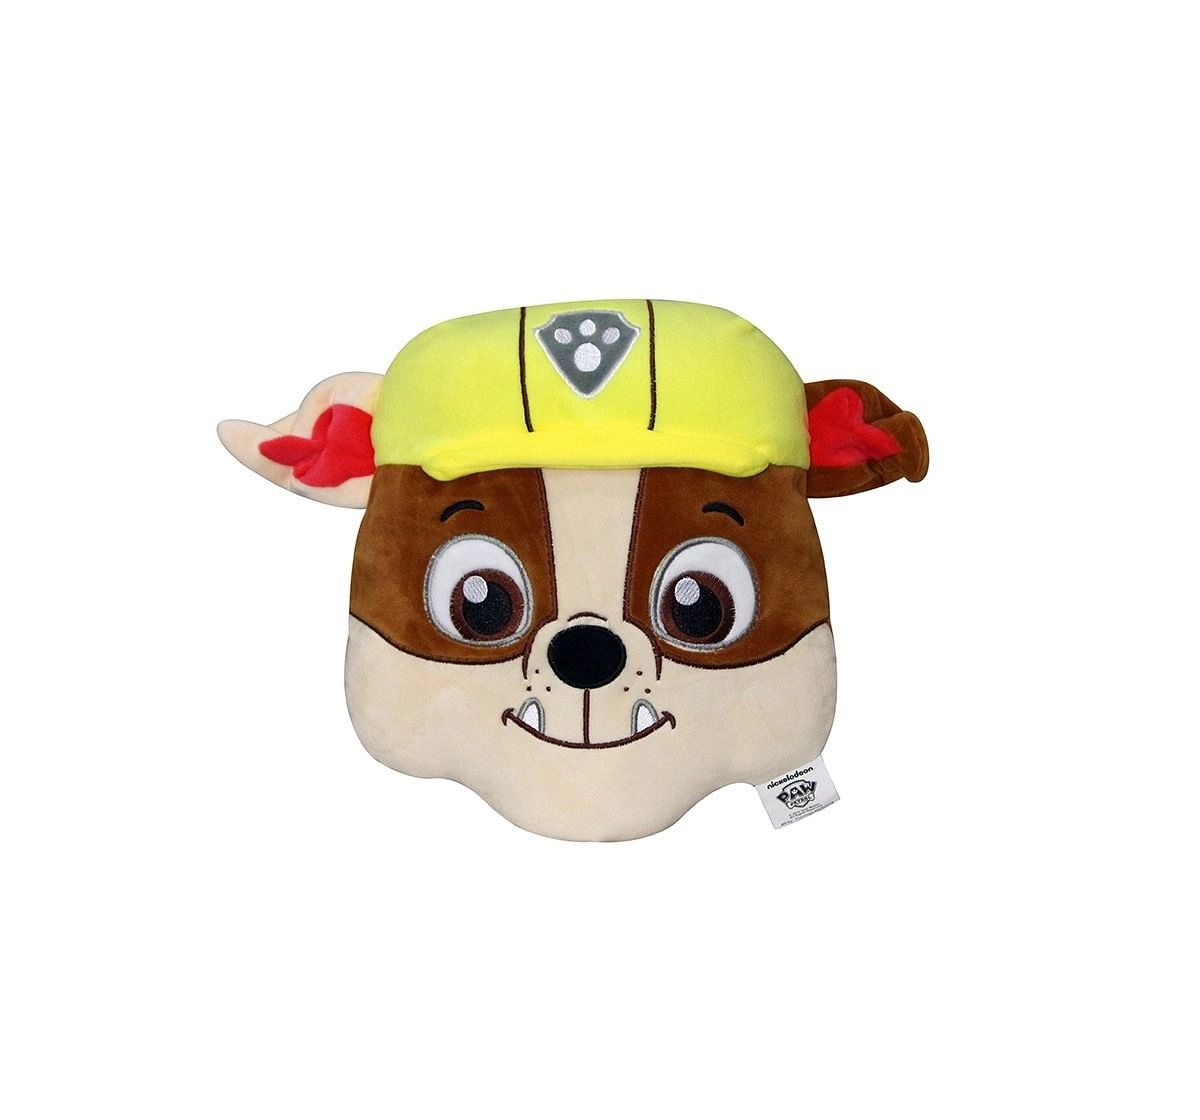 Paw Patrol Face Playtoy Rubble Plush Accessories for Kids age 12M+ - 30.48 Cm 